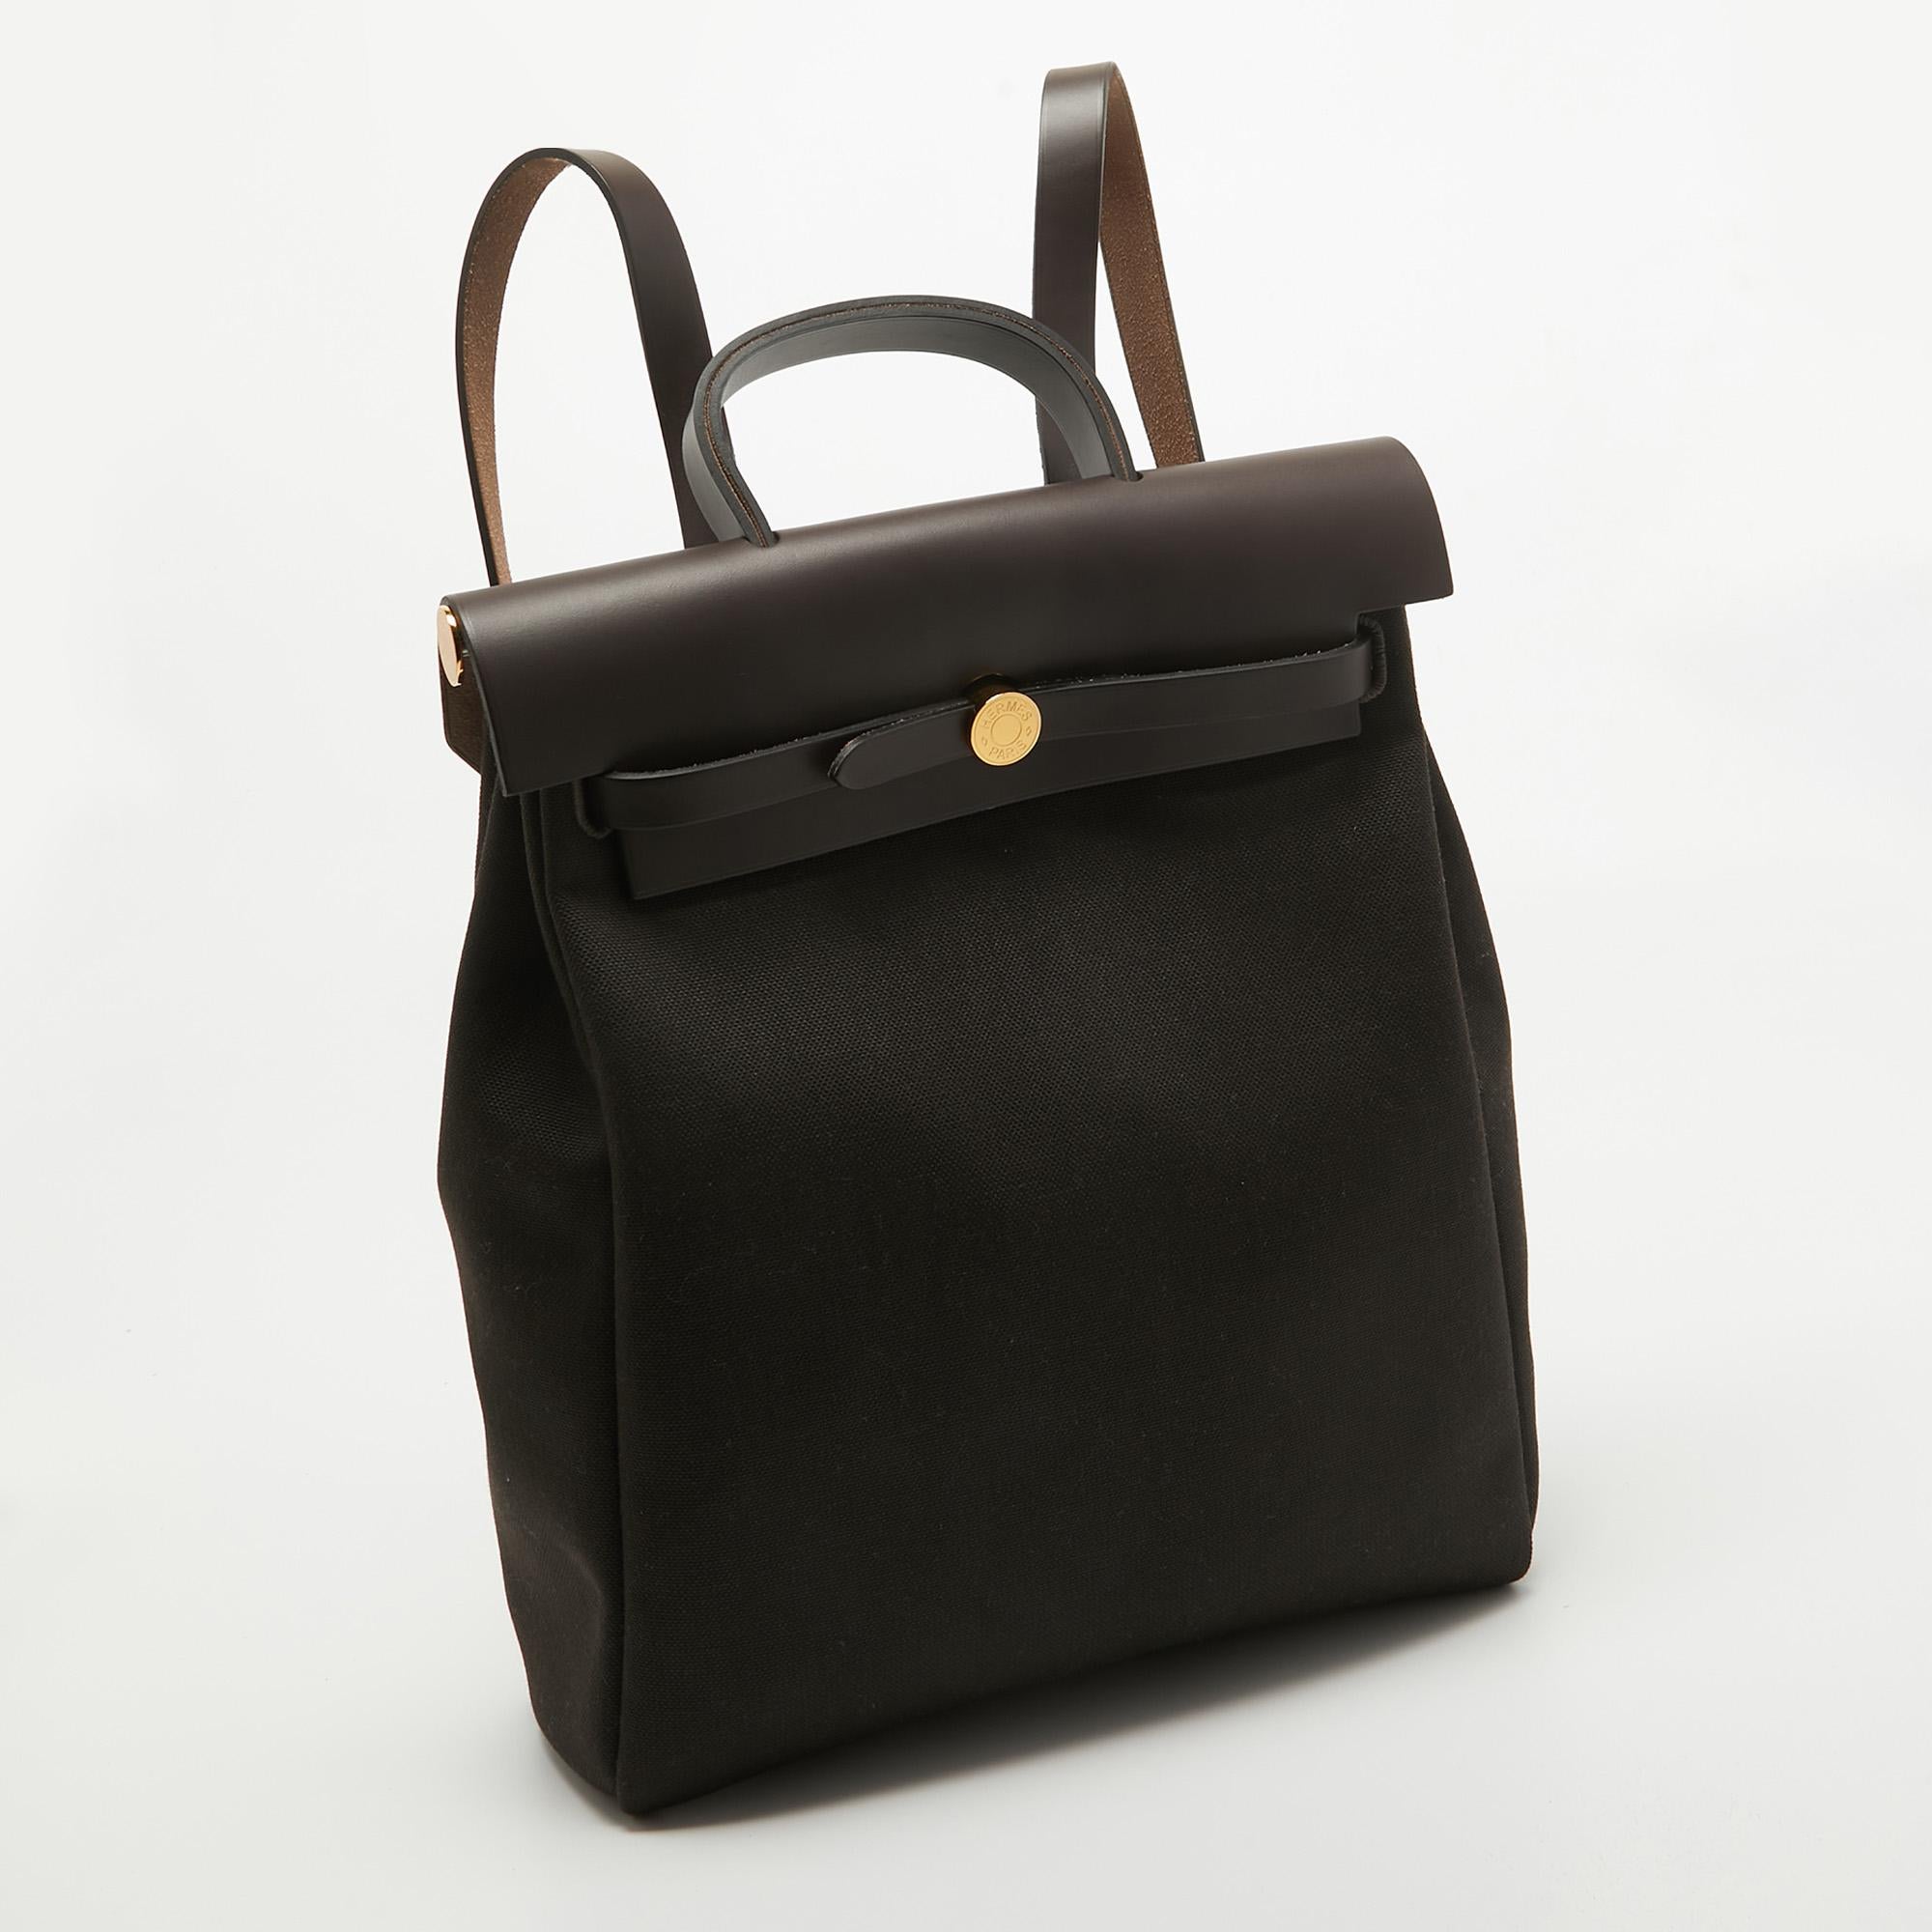 The Hermès Herbag backpack is a stylish and versatile accessory that effortlessly combines functionality with luxury. Crafted with impeccable attention to detail, it features a durable canvas body with supple leather accents. The spacious interior,